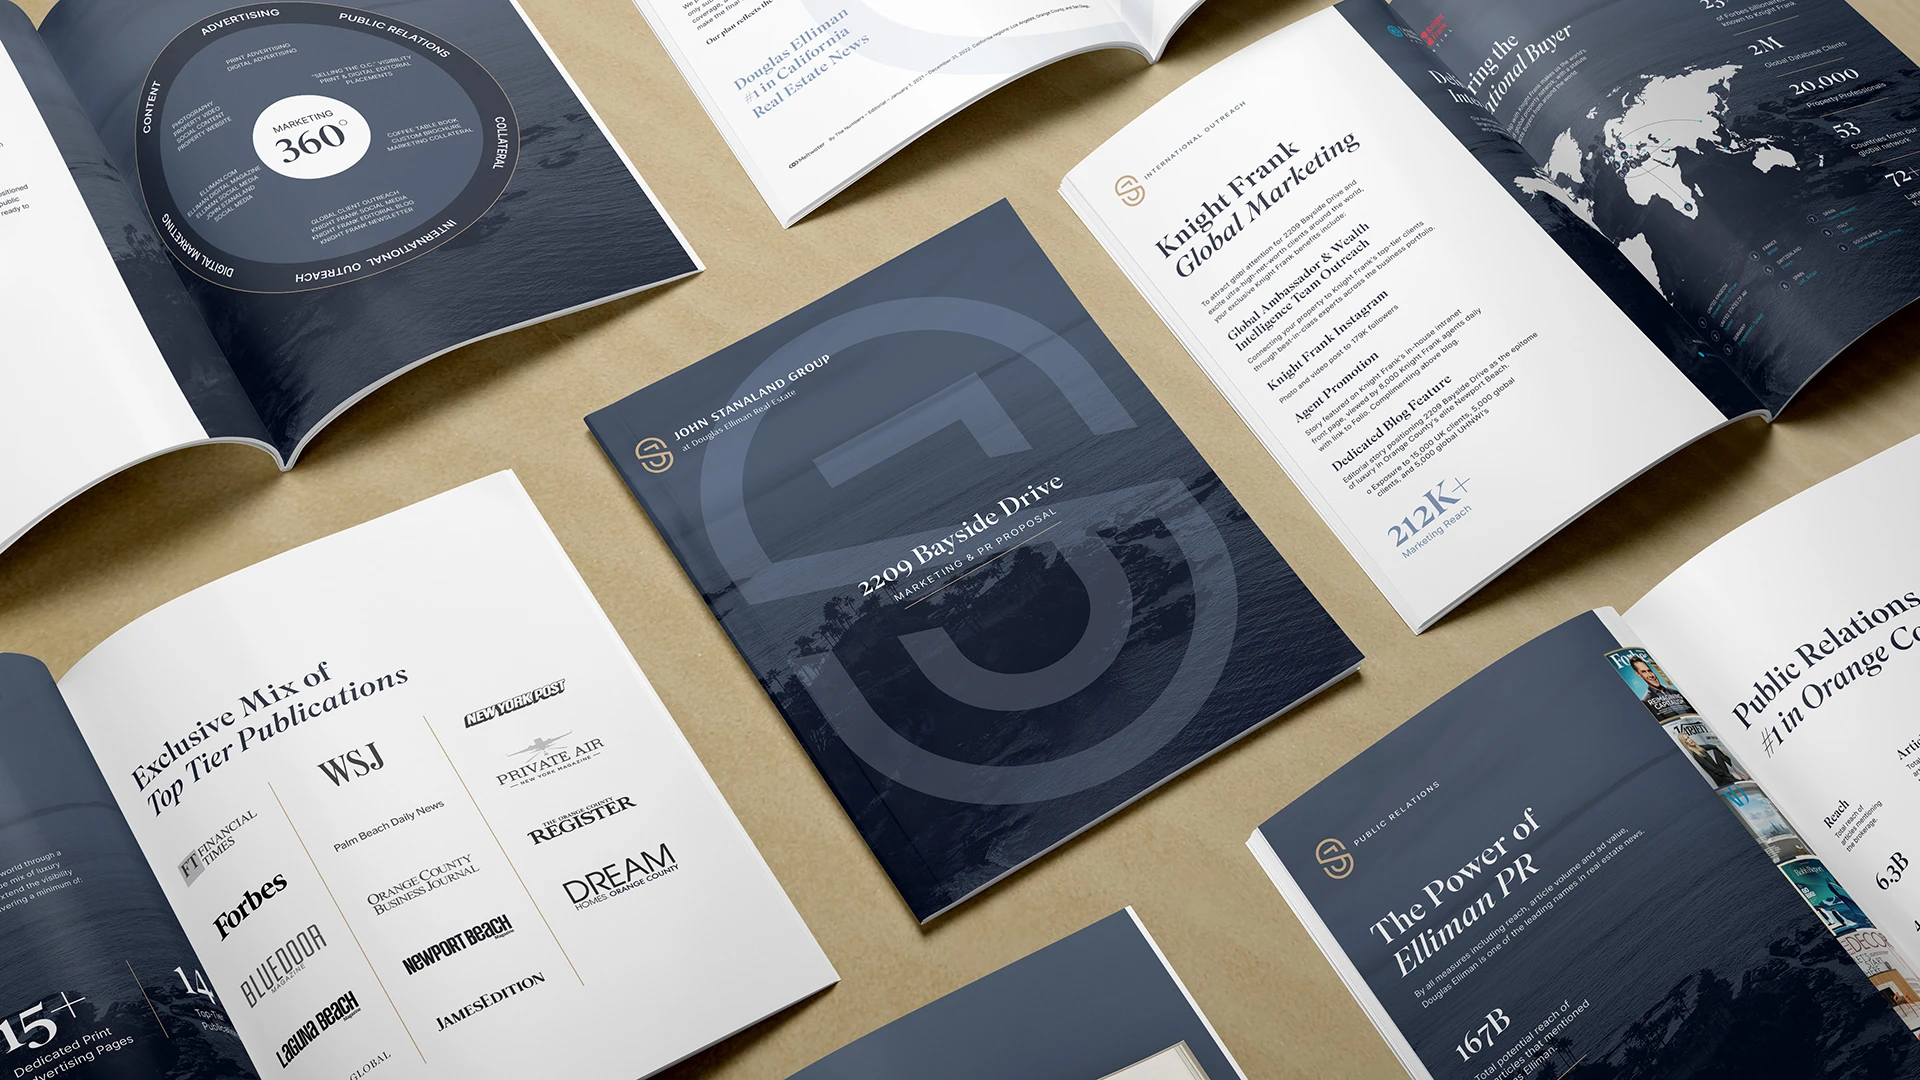 Marketing Proposal pages for John Stanaland Group